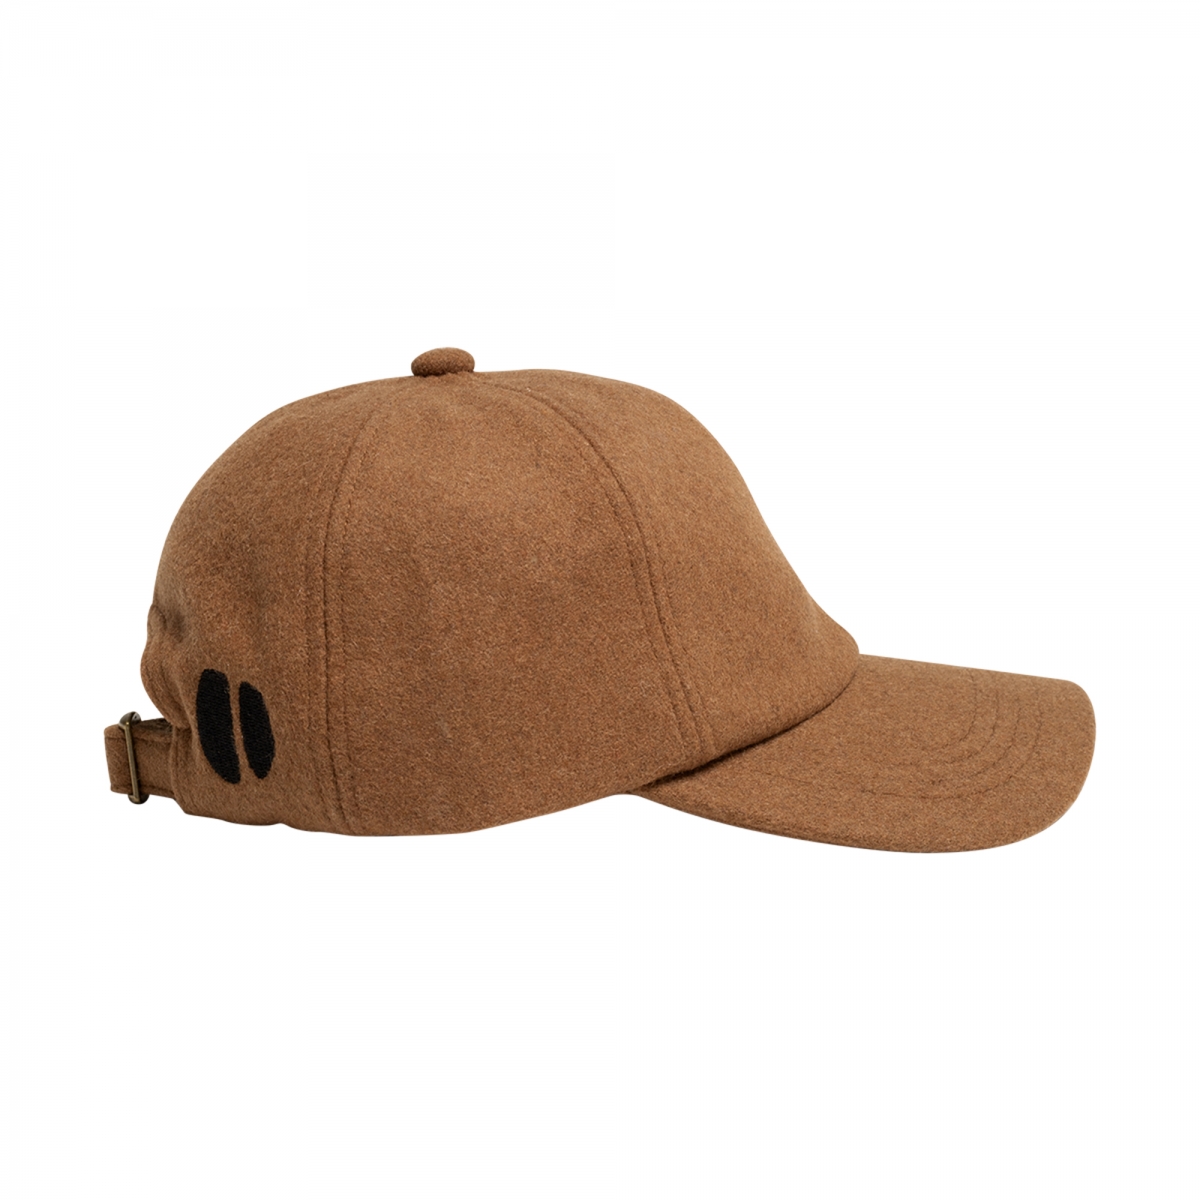 Maed for mini Wild wallaby cap brown AW2021-912 